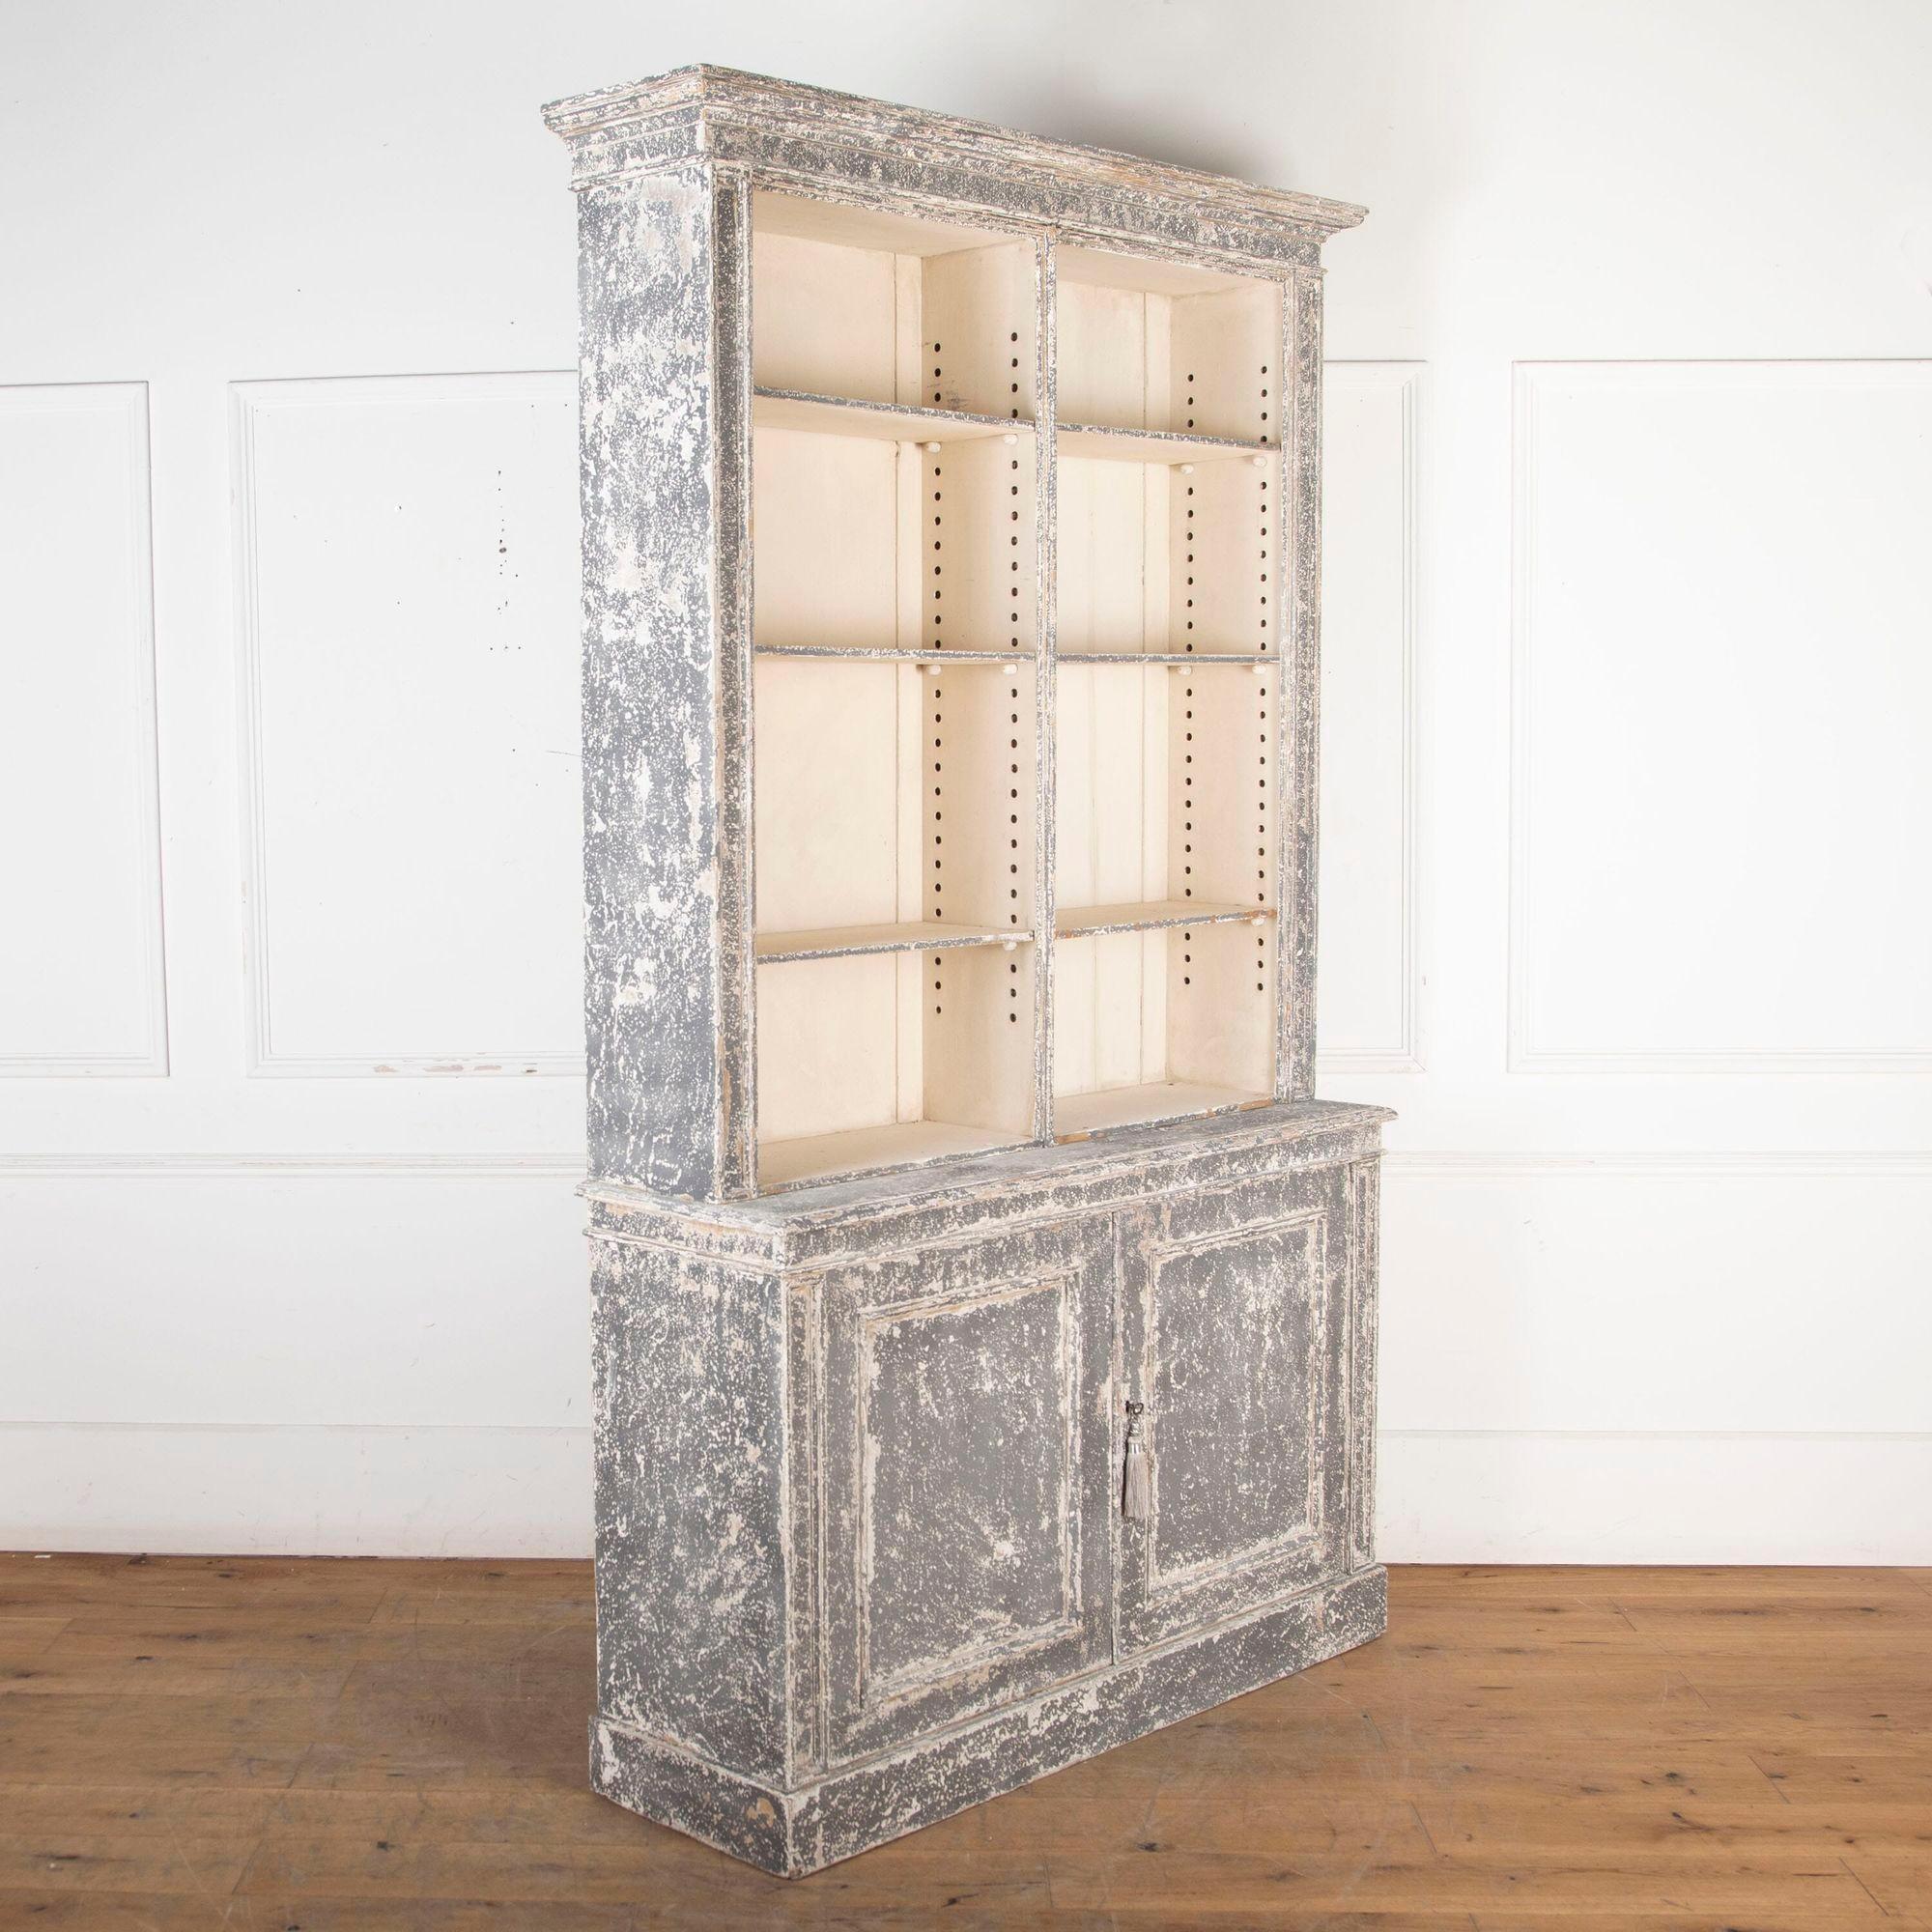 19th century French painted open bookcase with door to the bottom.
With adjustable shelves throughout. 
Circa 1860.